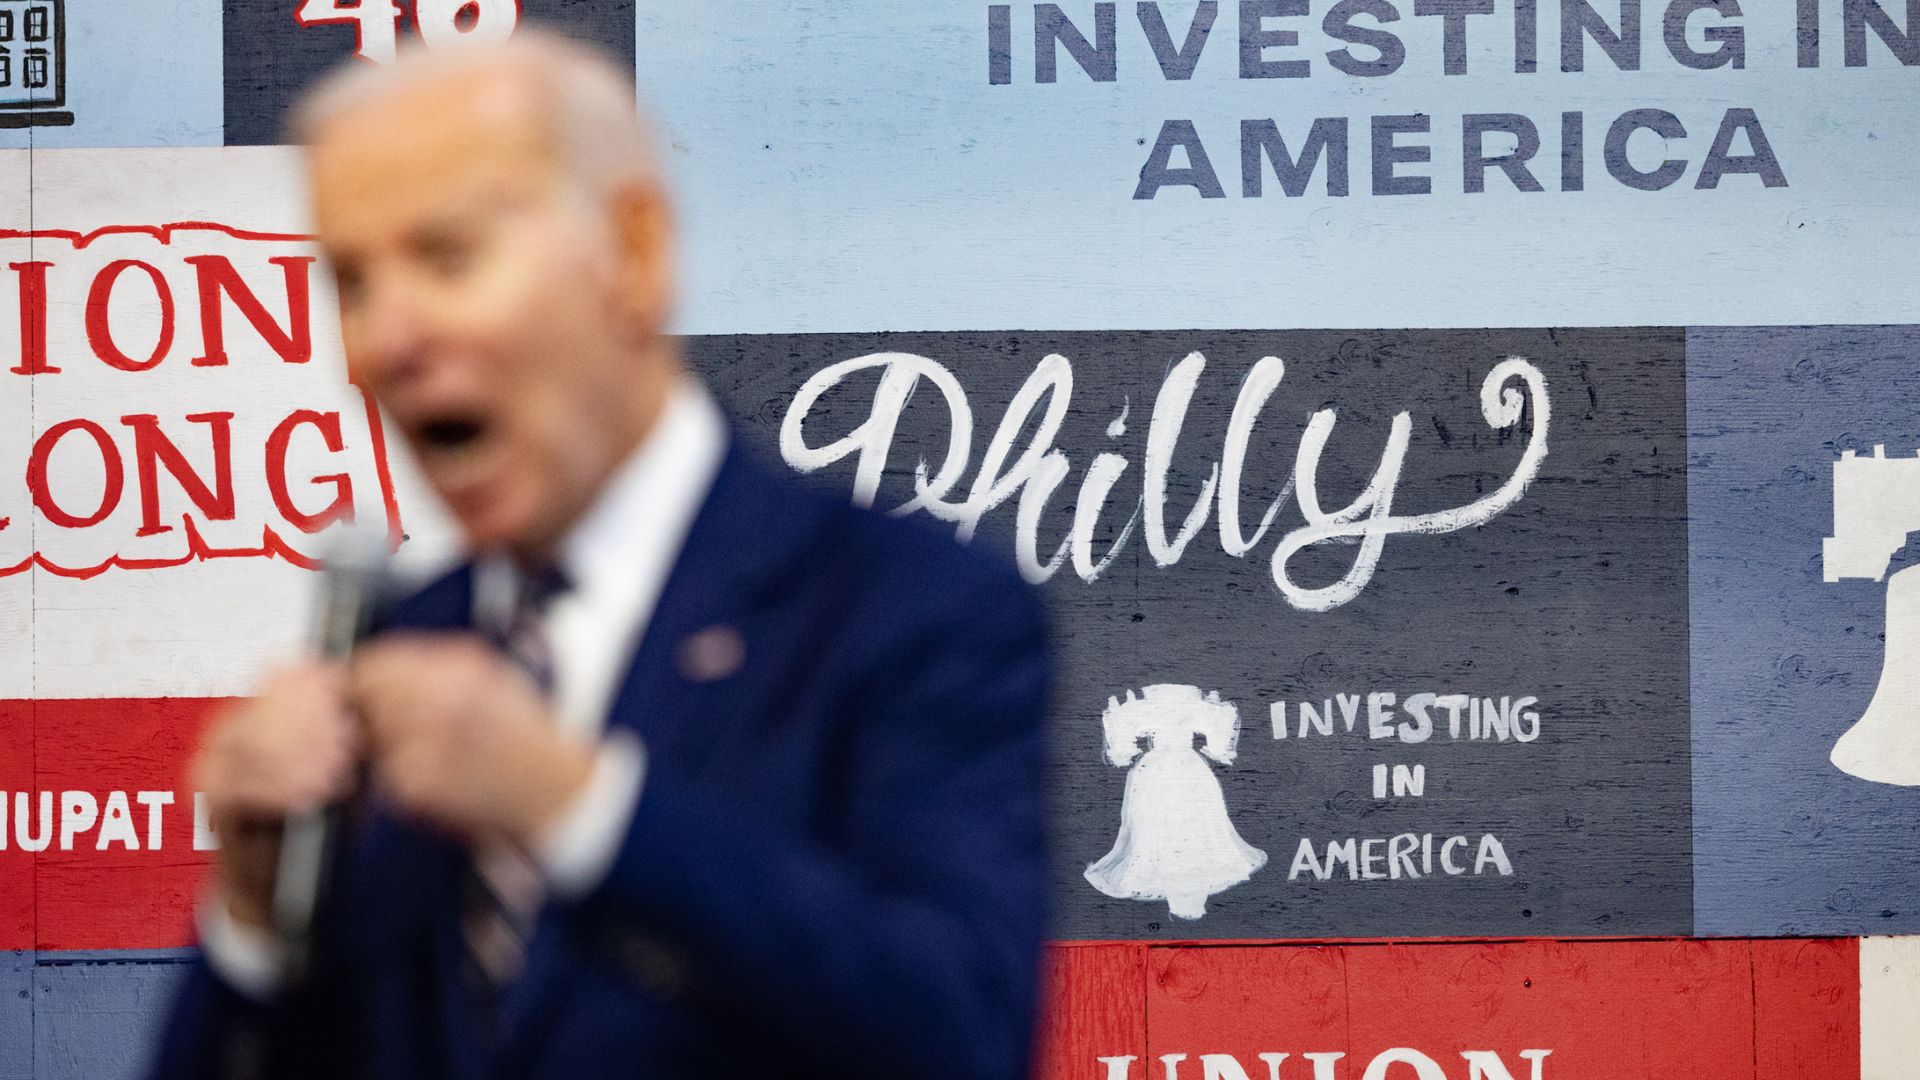 Friday Afternoon Update: Biden Classified Docs, Run On The Bank, Spring Break Risks